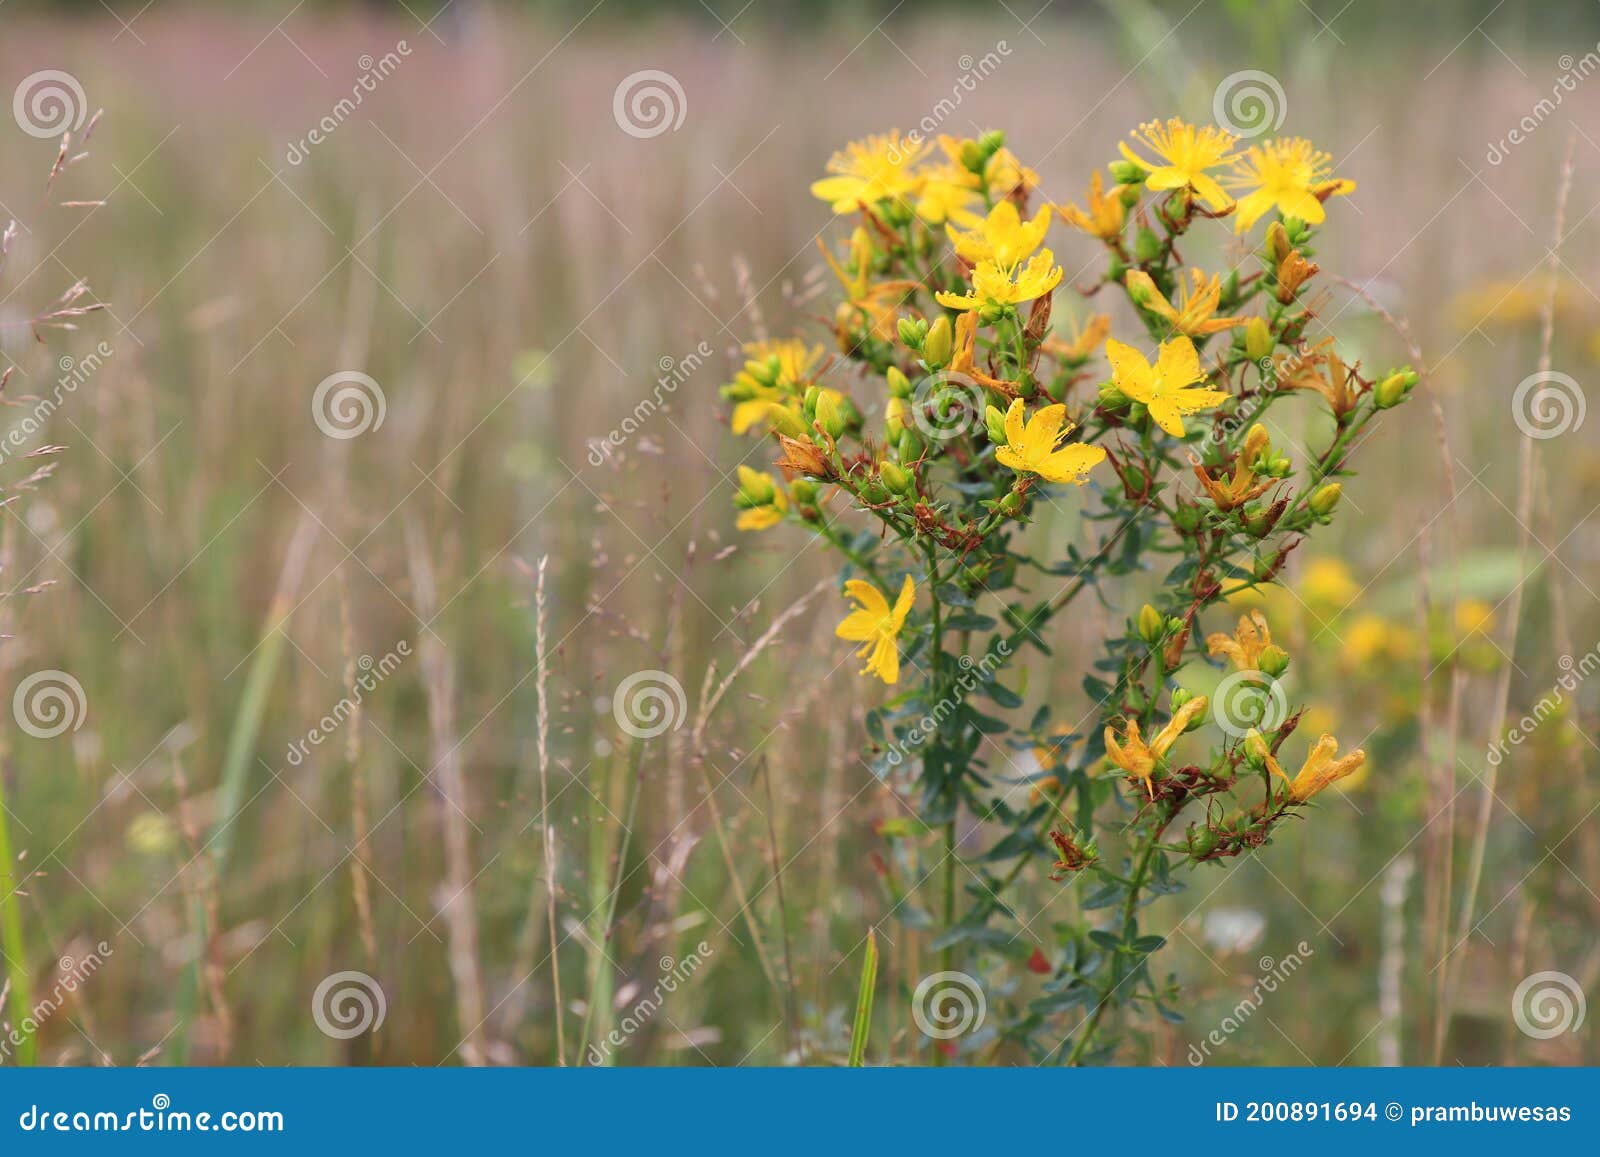 yellow flowers of hypericum perforatum (perforate st john`s-wort) in a field in the morning, close up, copy space